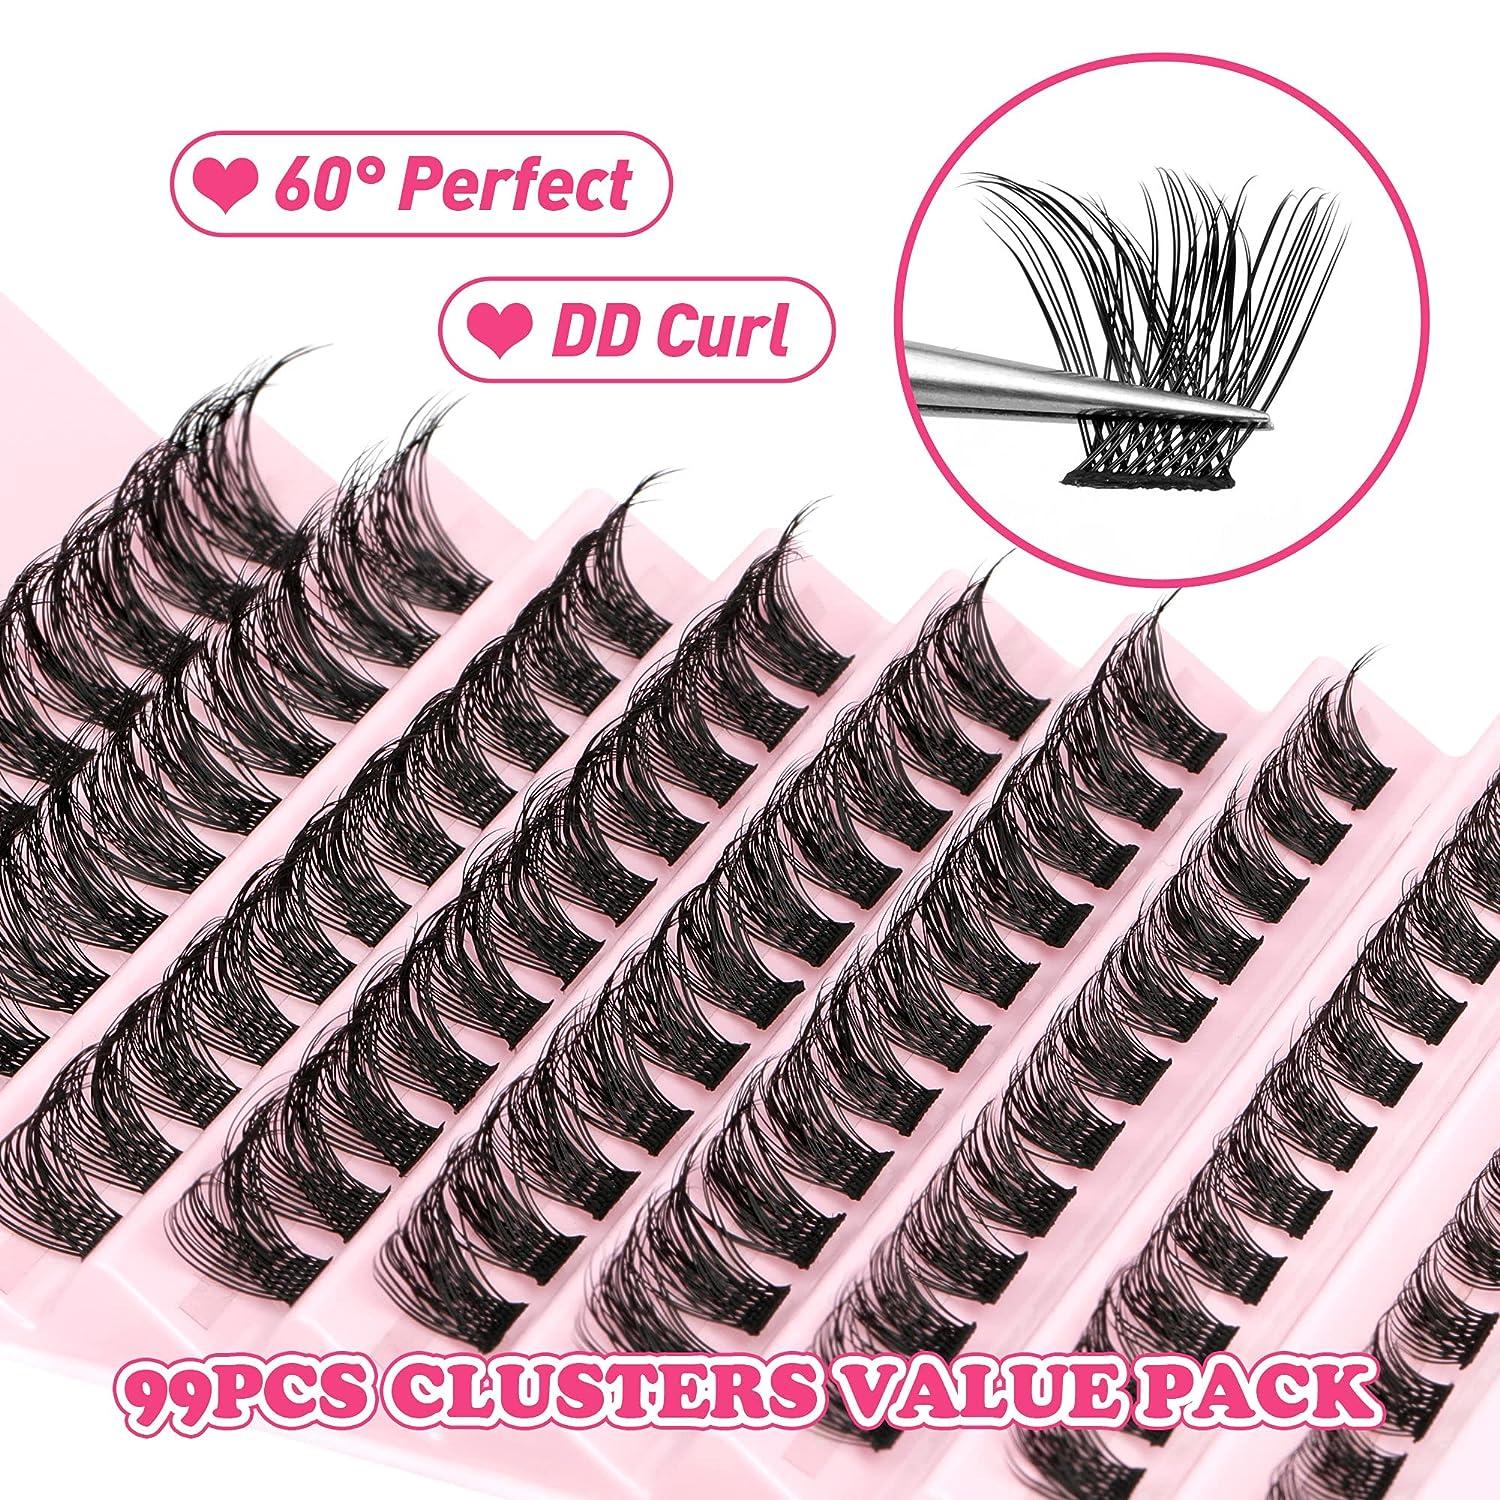 Lash Clusters 108Pcs DIY Eyelash Extenisons Natural Wispy Clusters Lashes  8-16MM D Curl Individual Lashes DIY at Home Wispy Fluffy Lash Extensions  Reusable Individuals DIY at Home by JIMIRE C -02